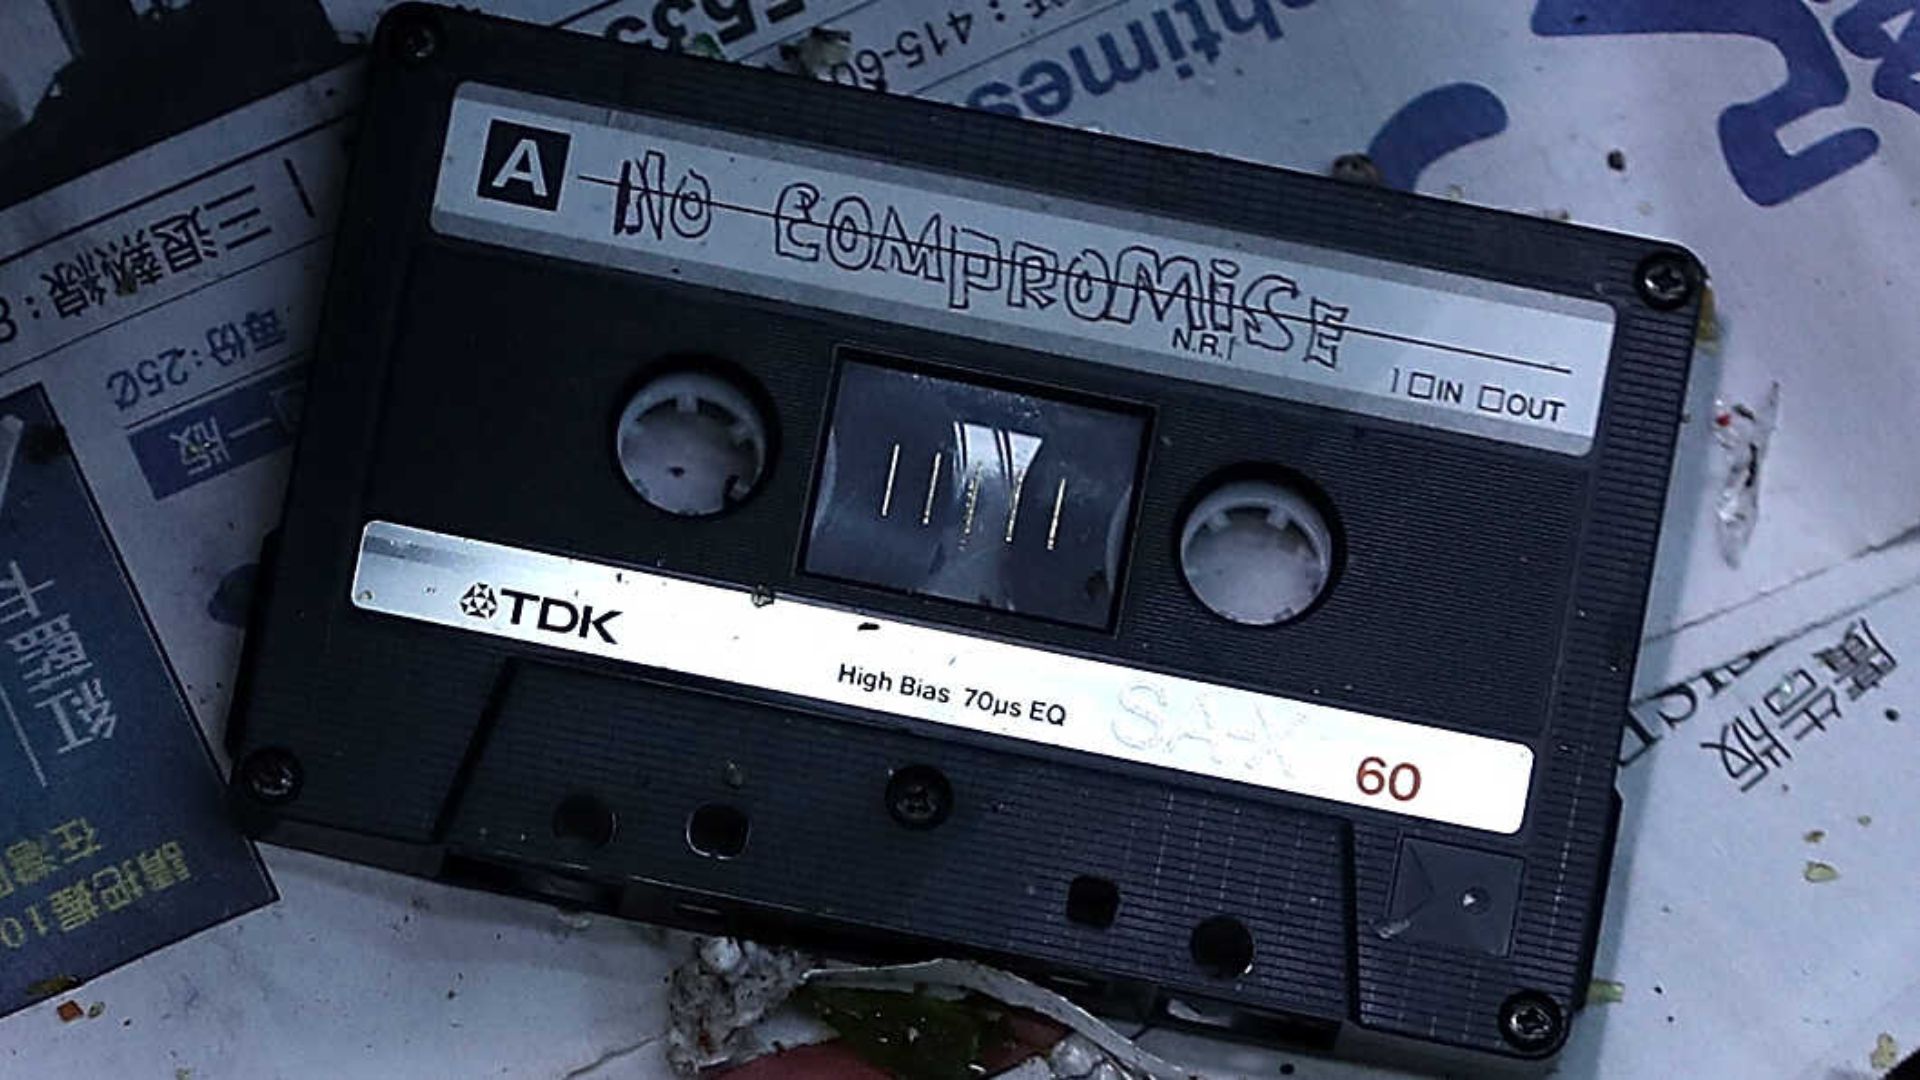 An Old Black Cassette Tape With A Note That Said 'No Compromise'